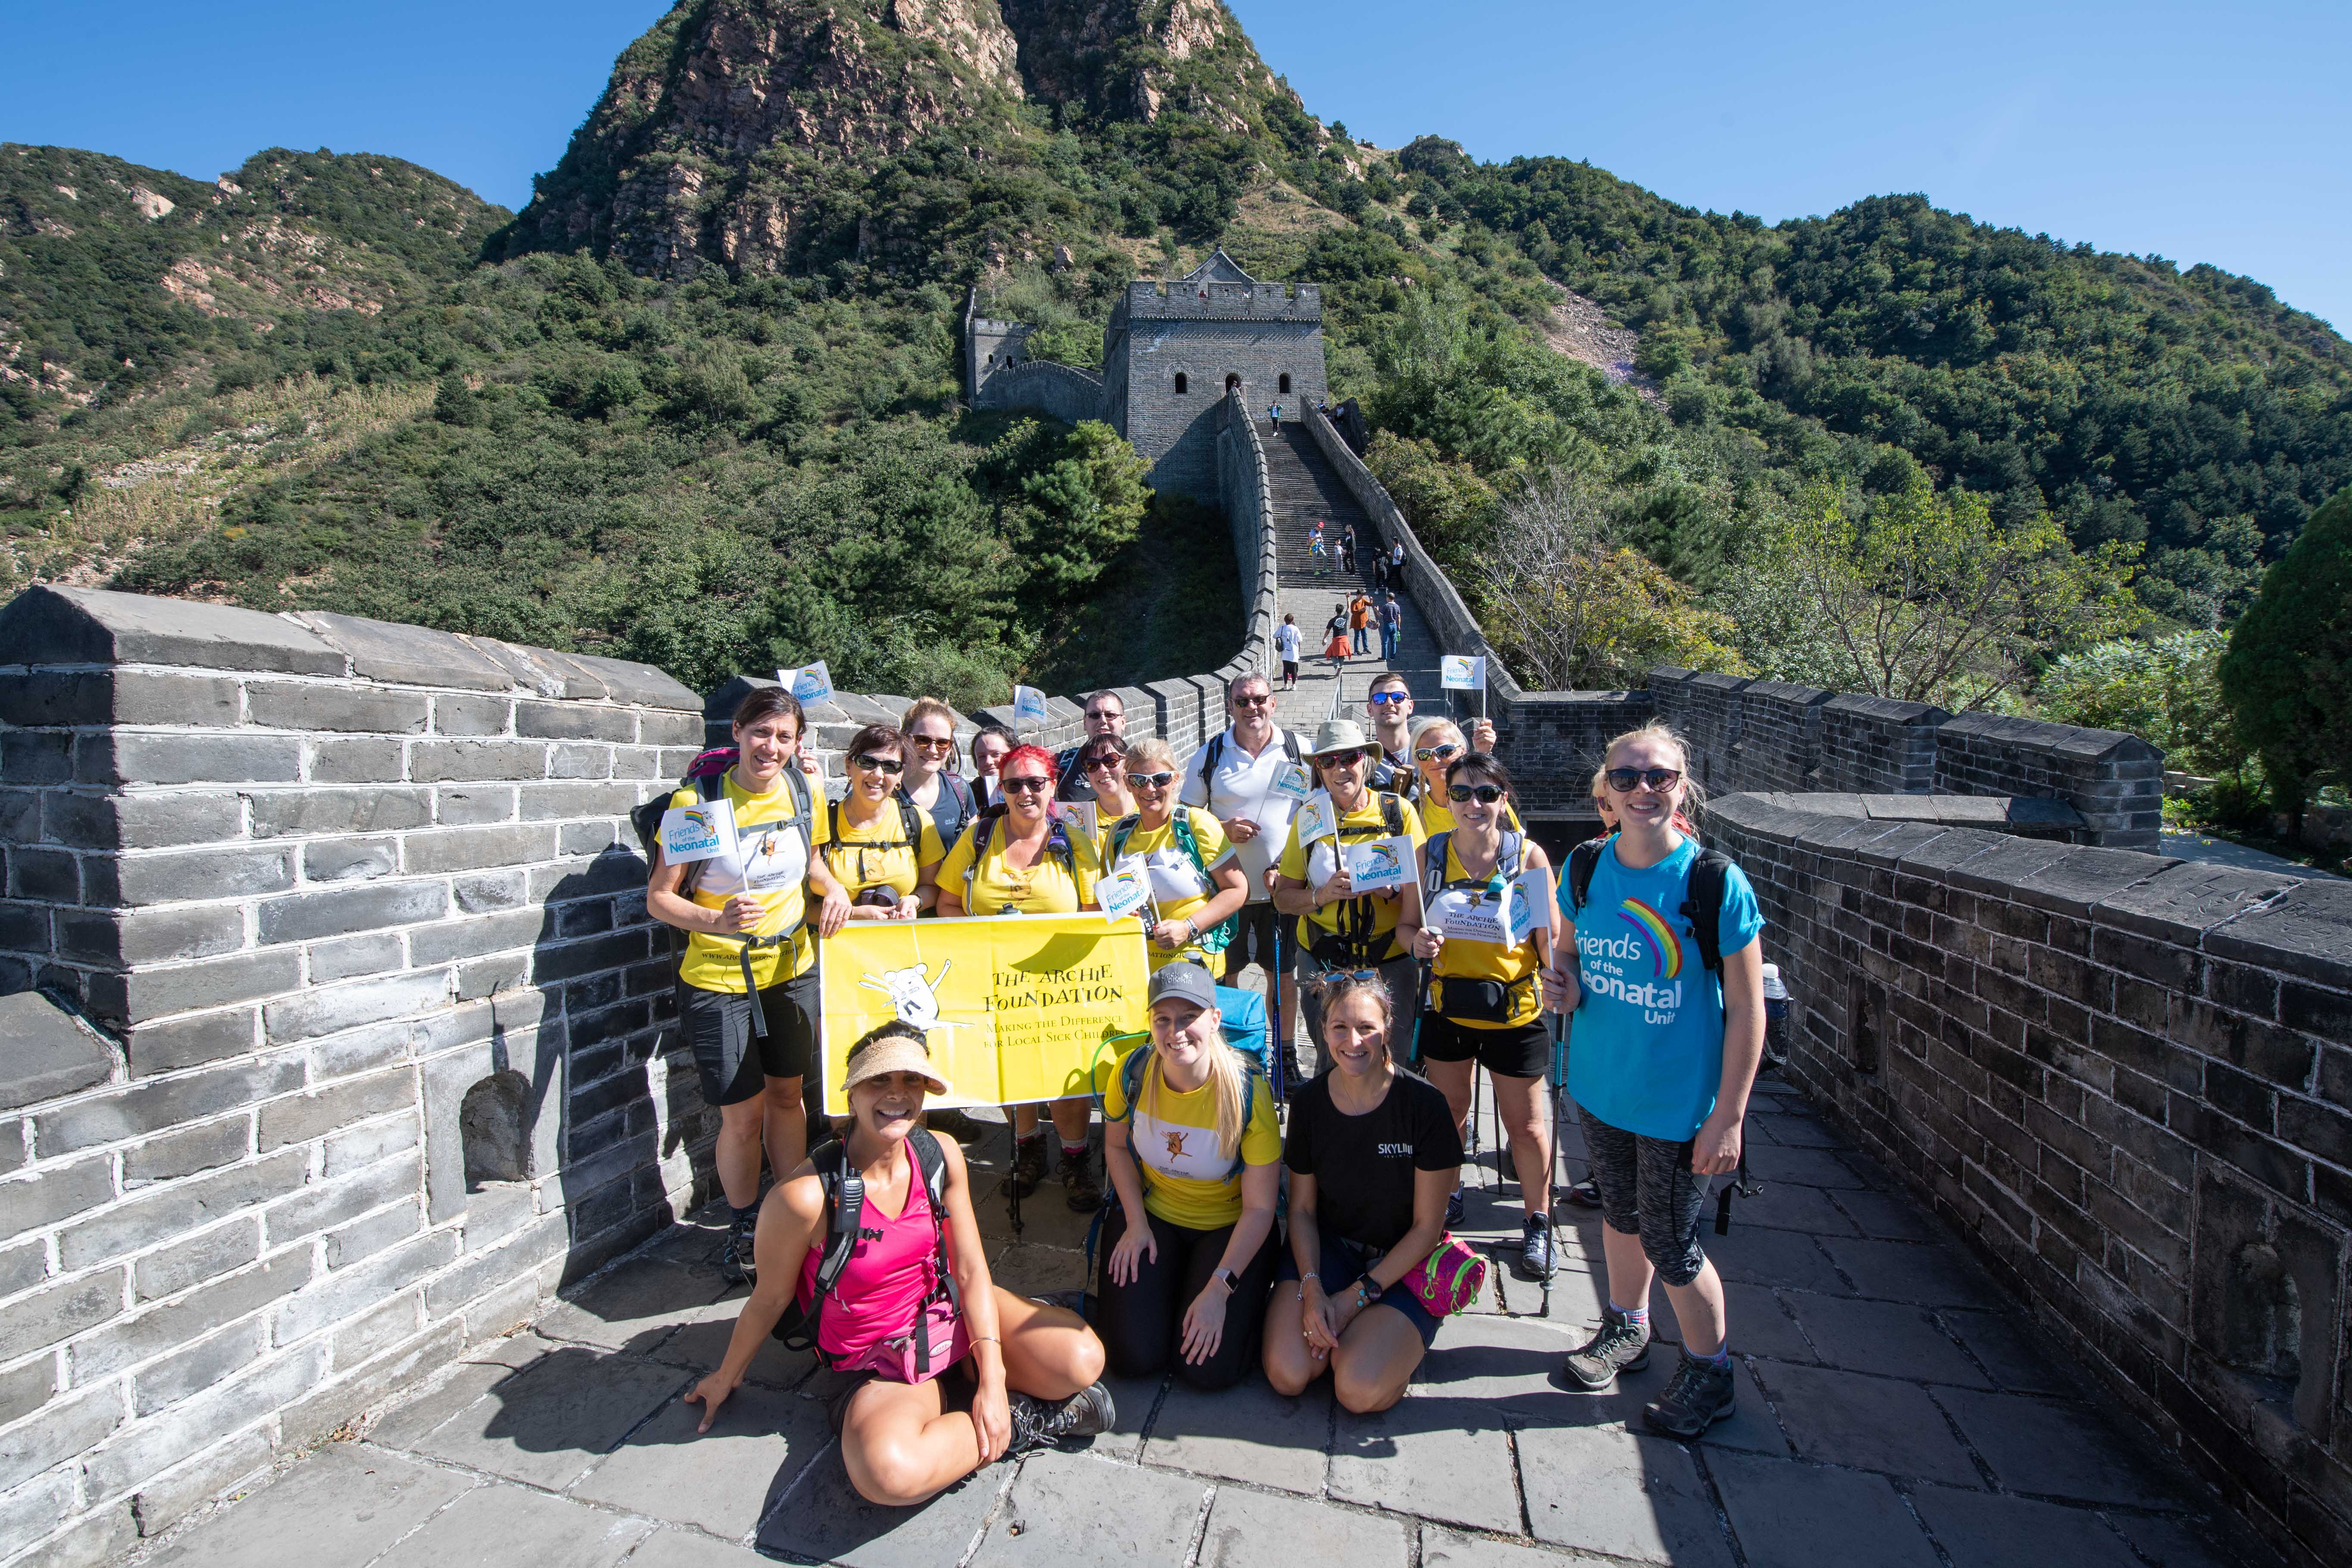 More than £35,000 was raised during The Archie Foundation's previous trek of the Great Wall of China in 2018